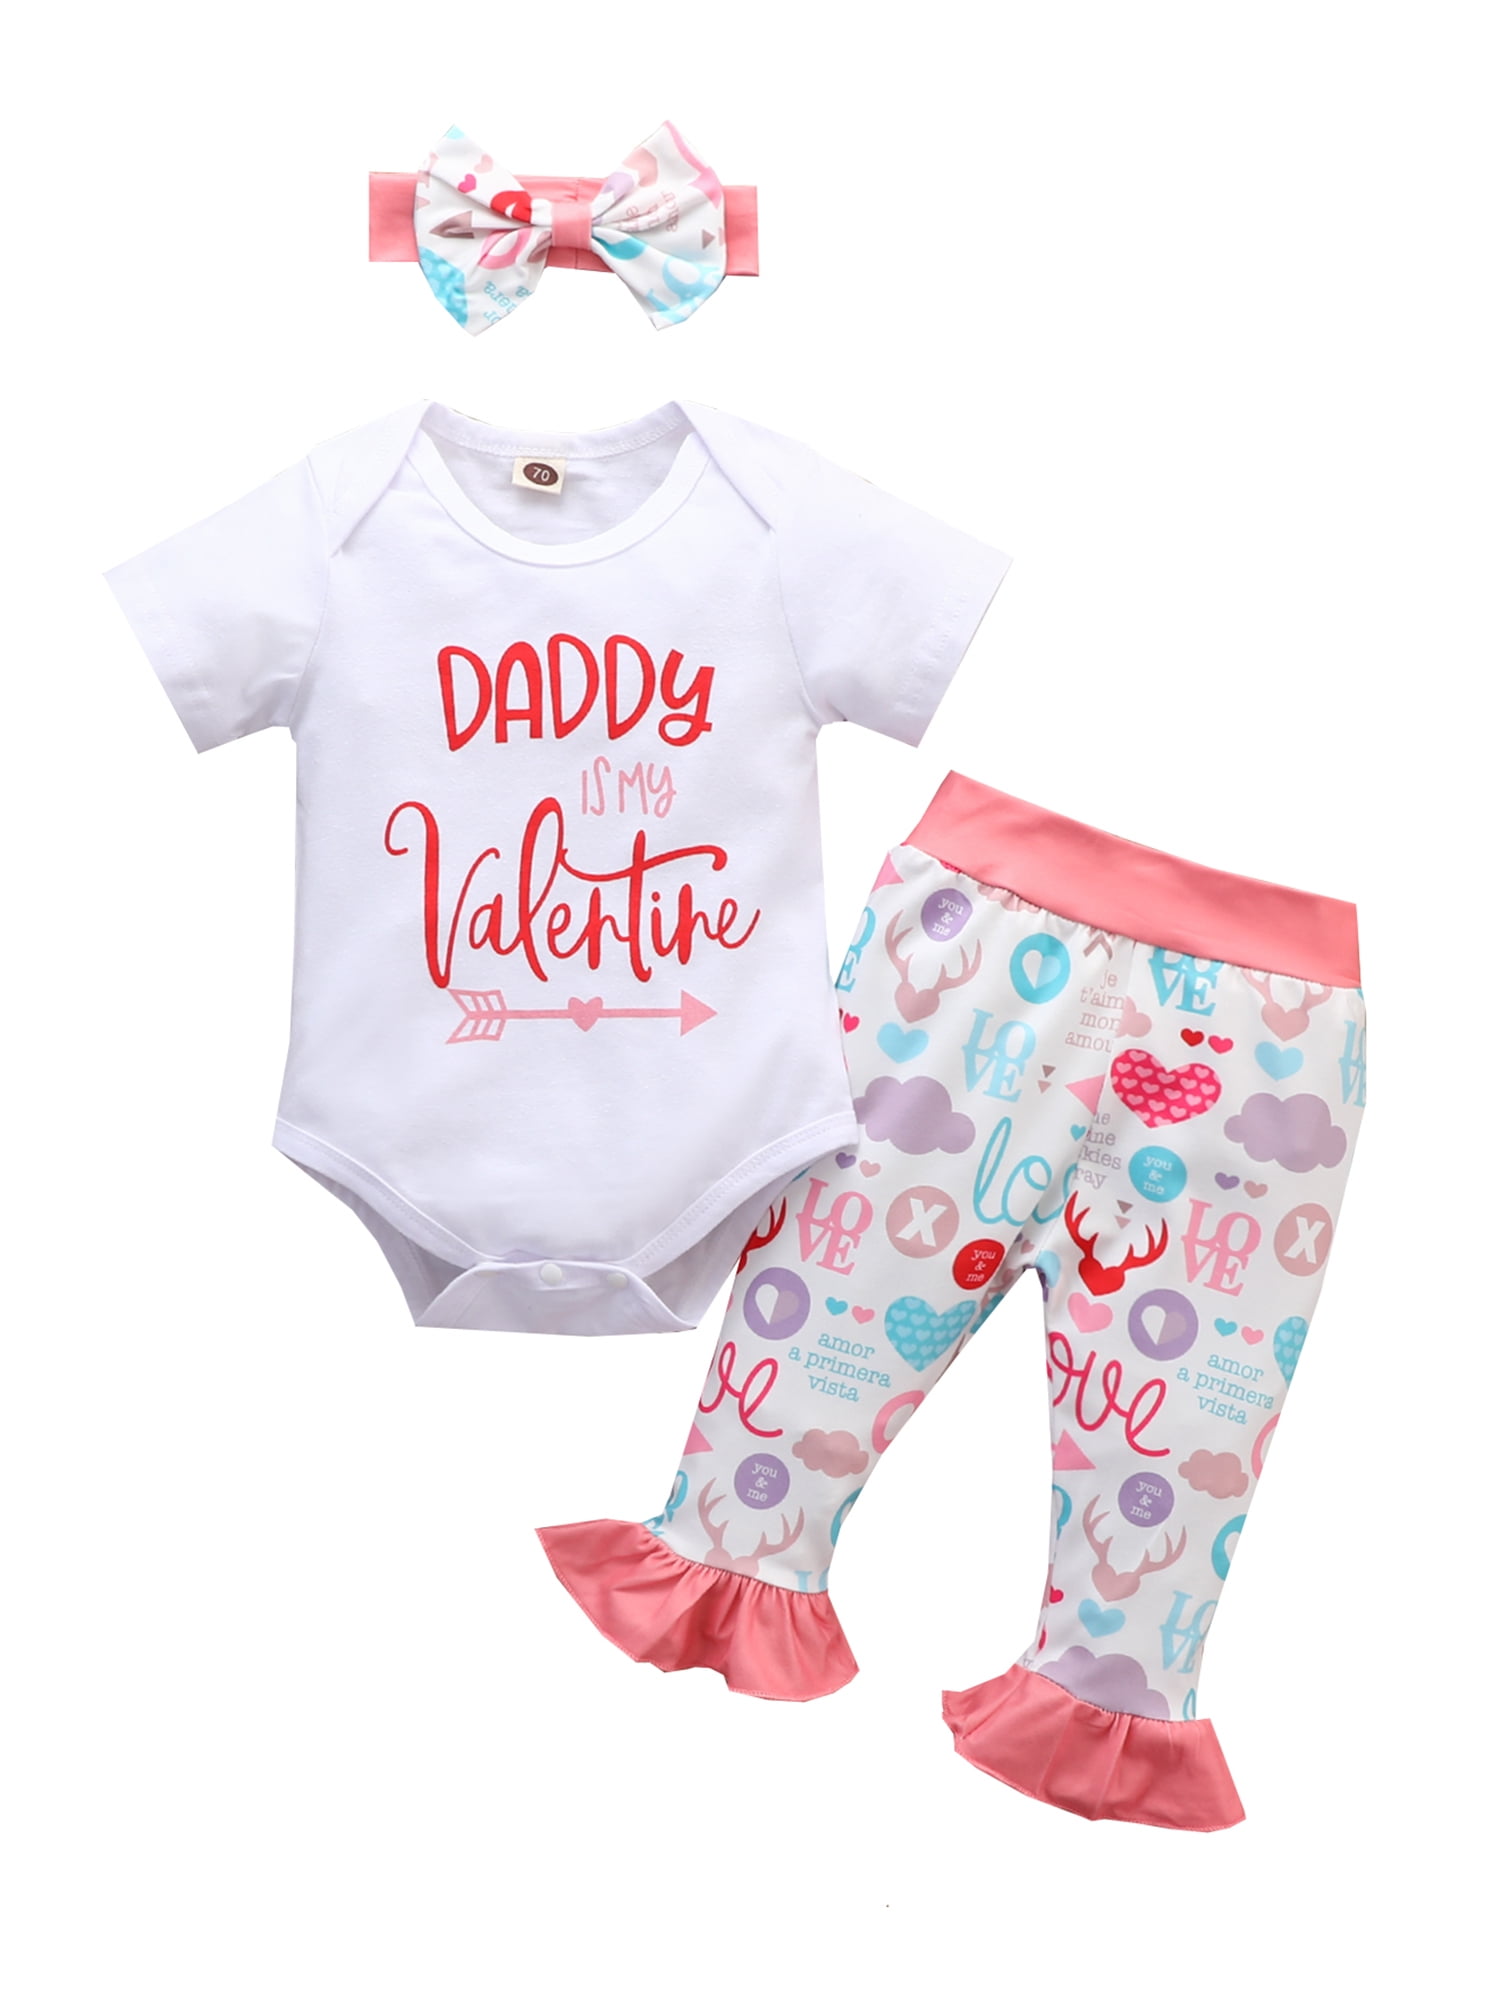 Baby Girl Long Sleeve Pink Ruffle Romper Flamingo Printing Pants with Headband Outfit Set